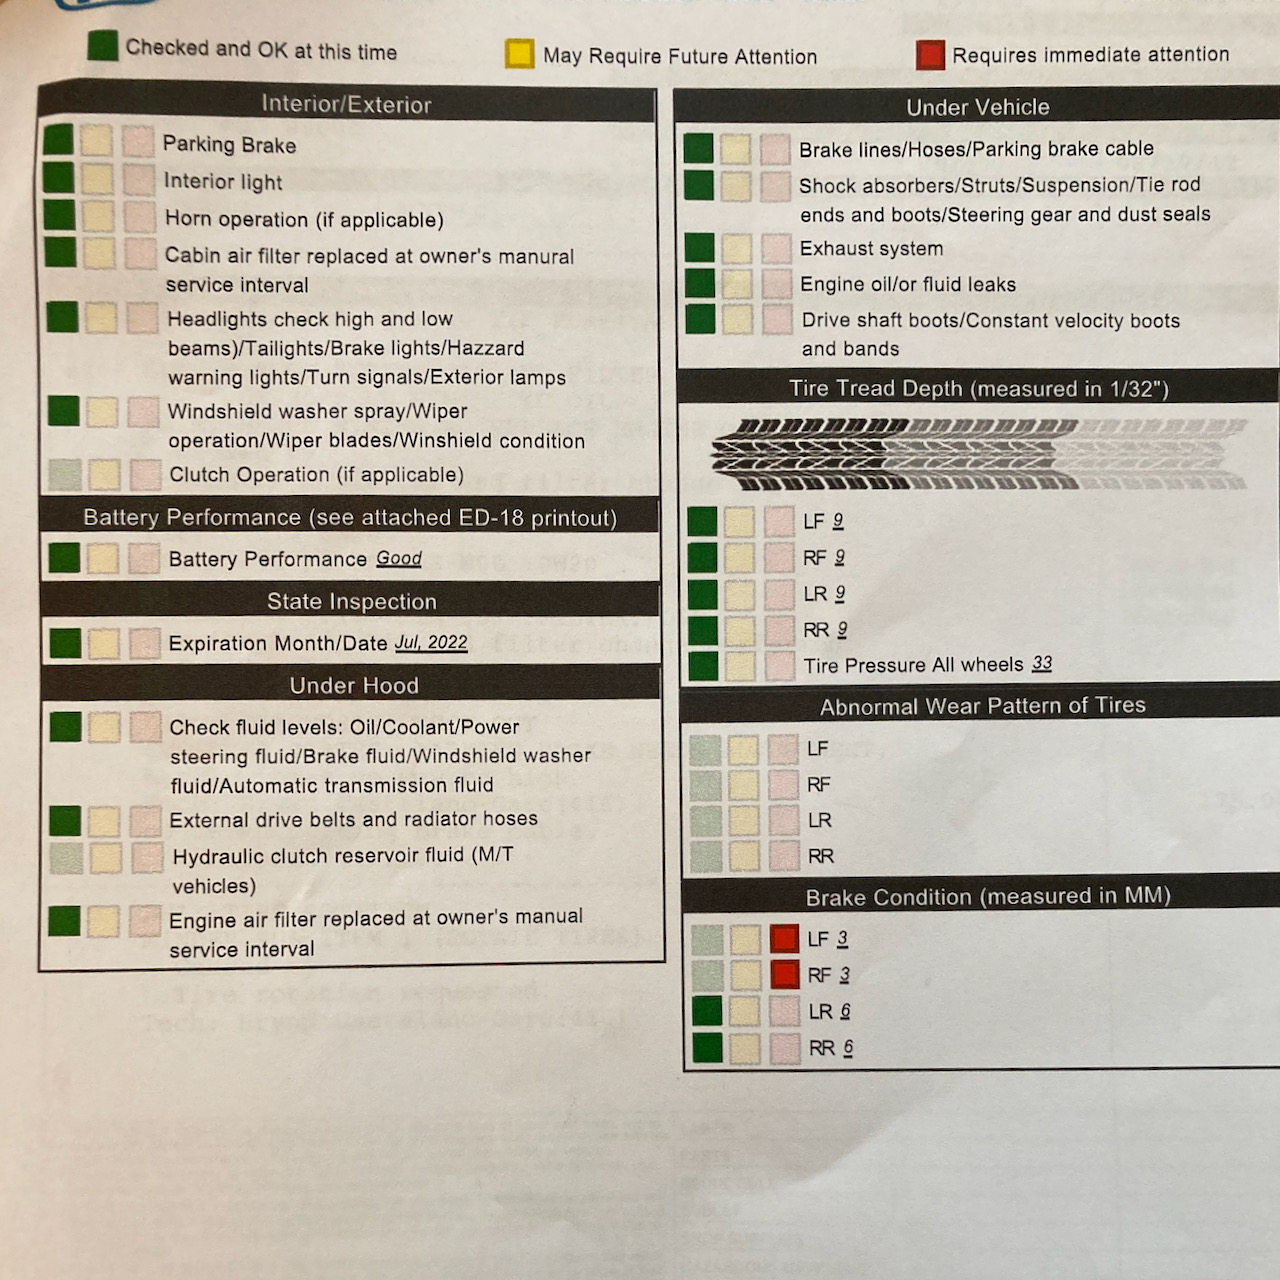 Vehicle inspection report with all areas in green for checked and OK aside from front brakes.